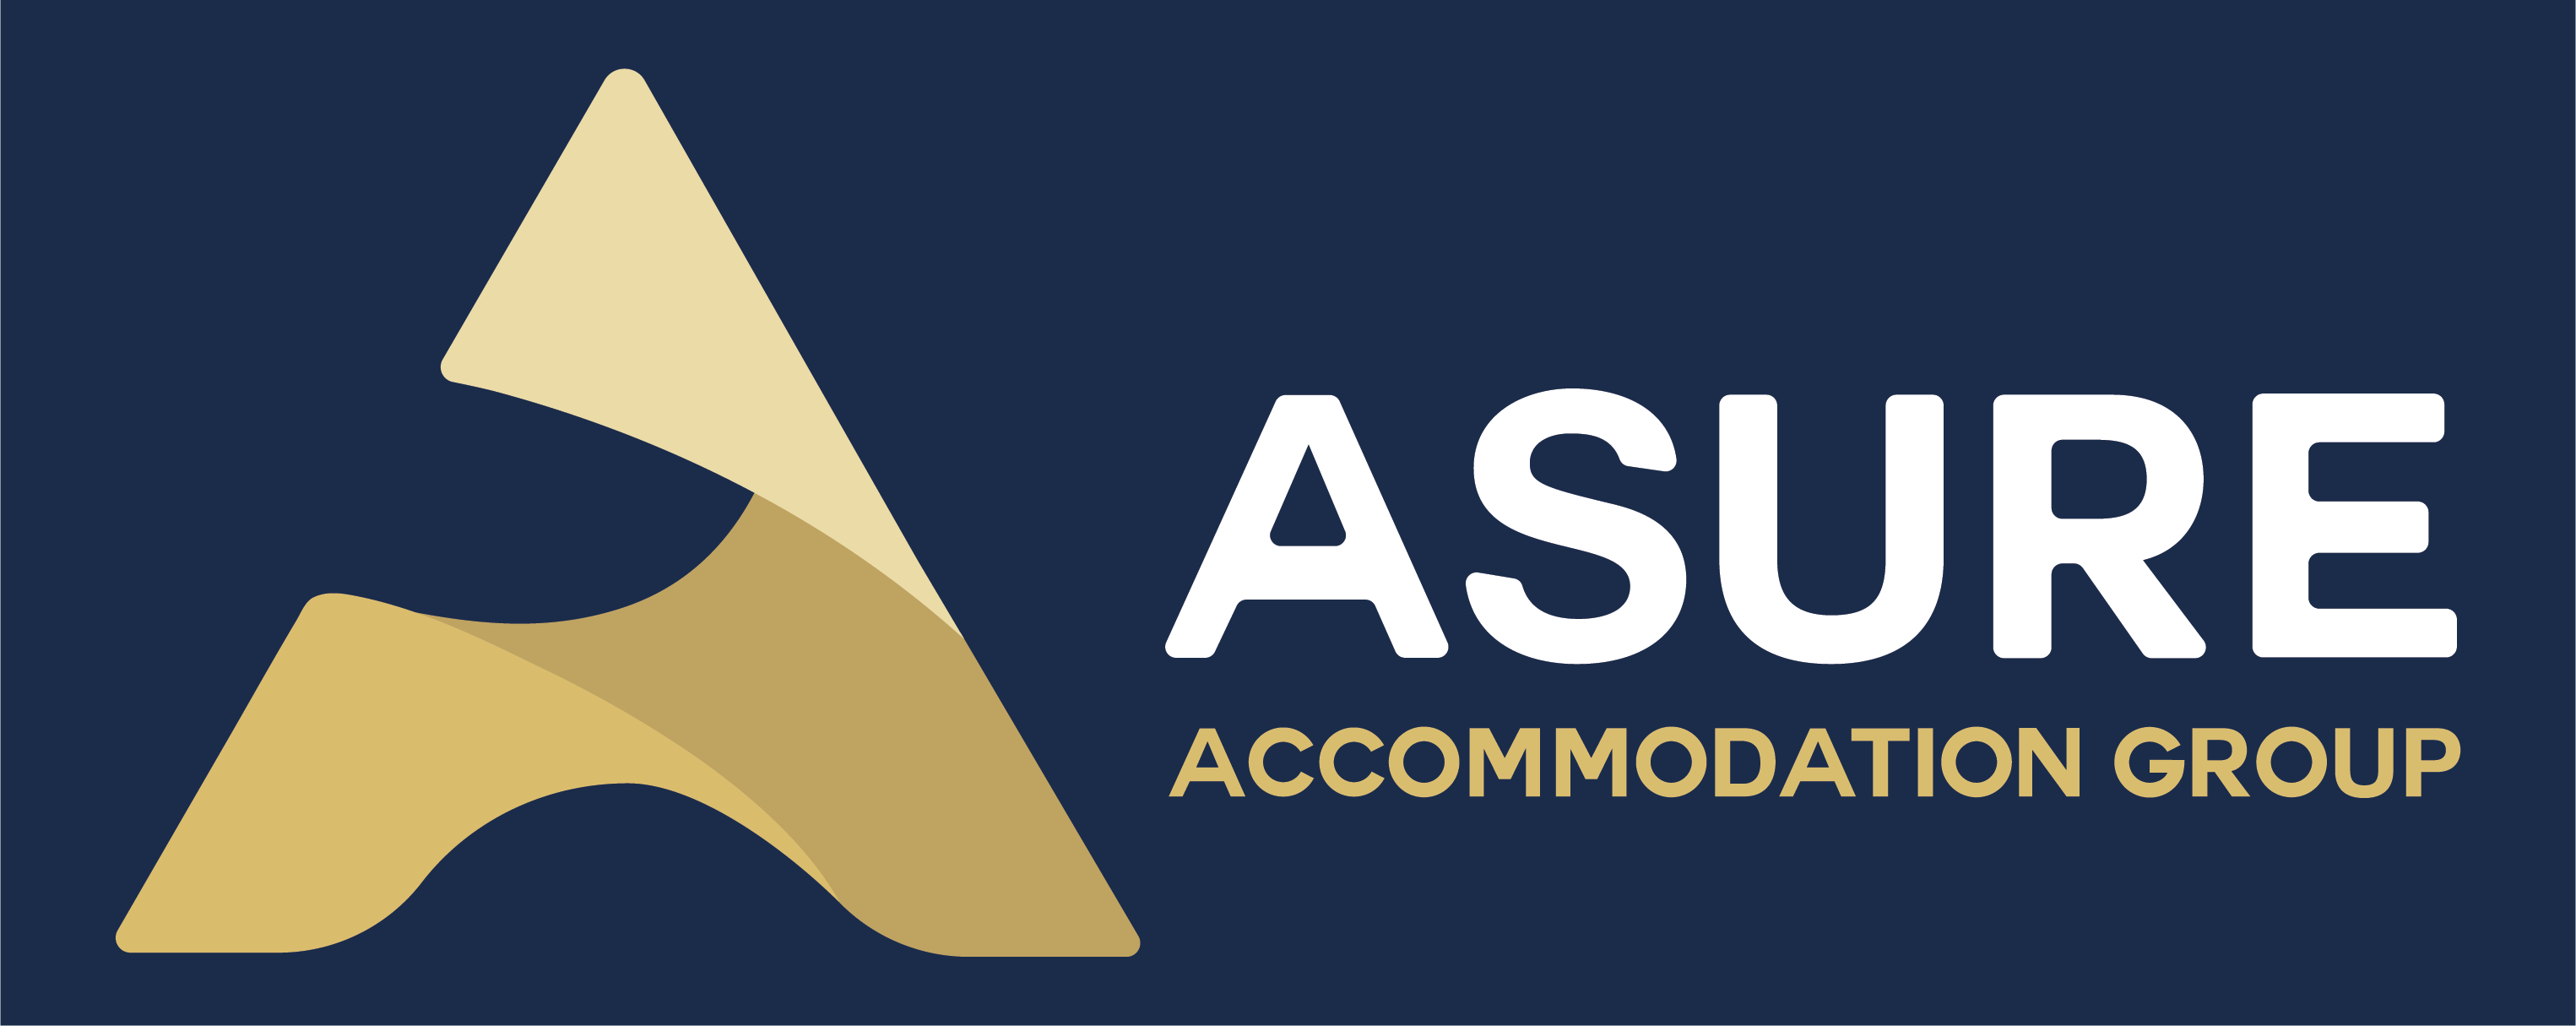 ASURE Accommodation Group Intranet